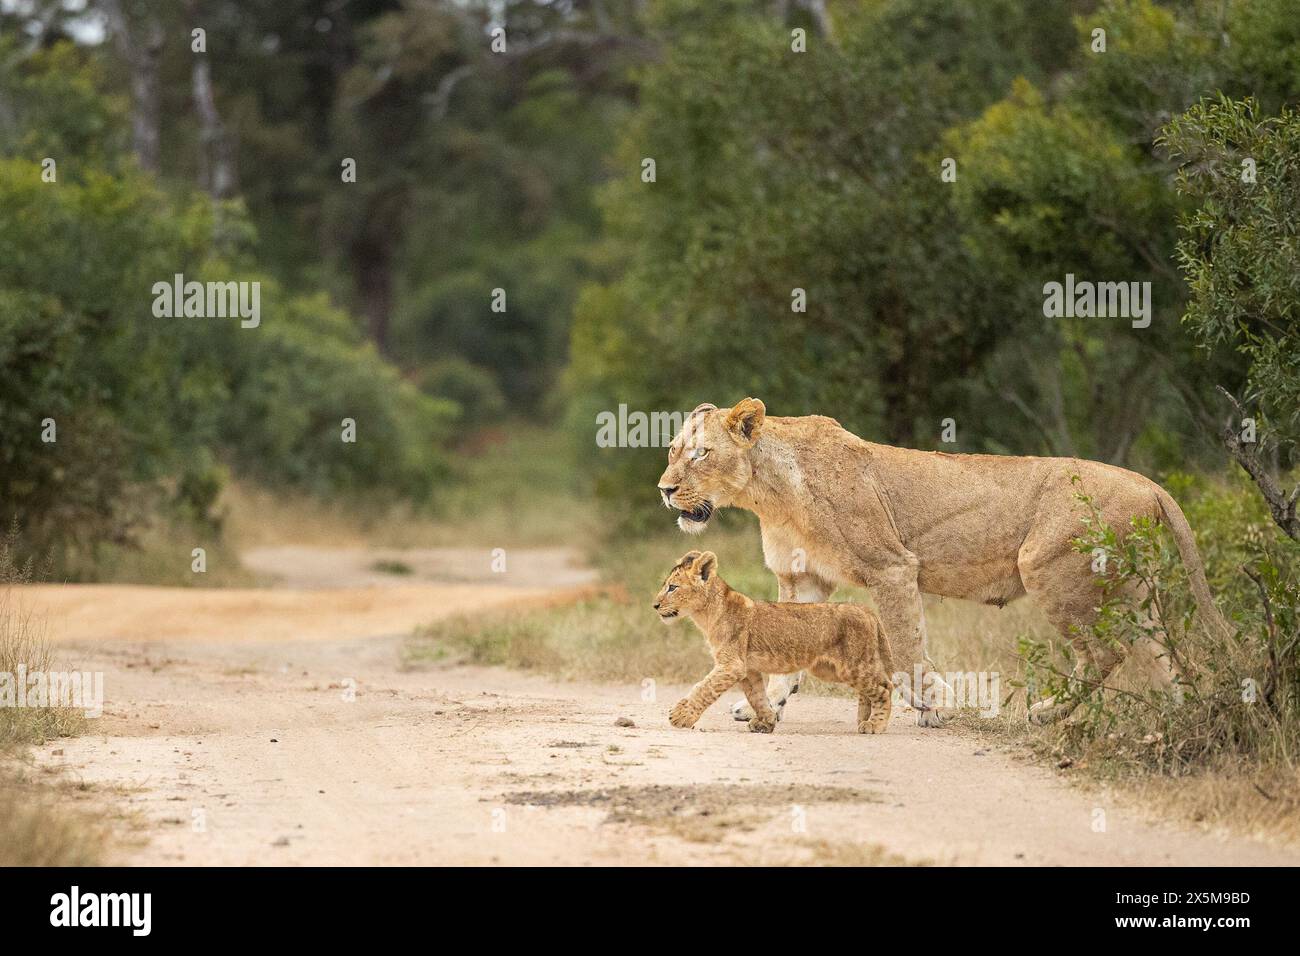 A lioness and her cubs, Panthera leo, crossing a road. Stock Photo